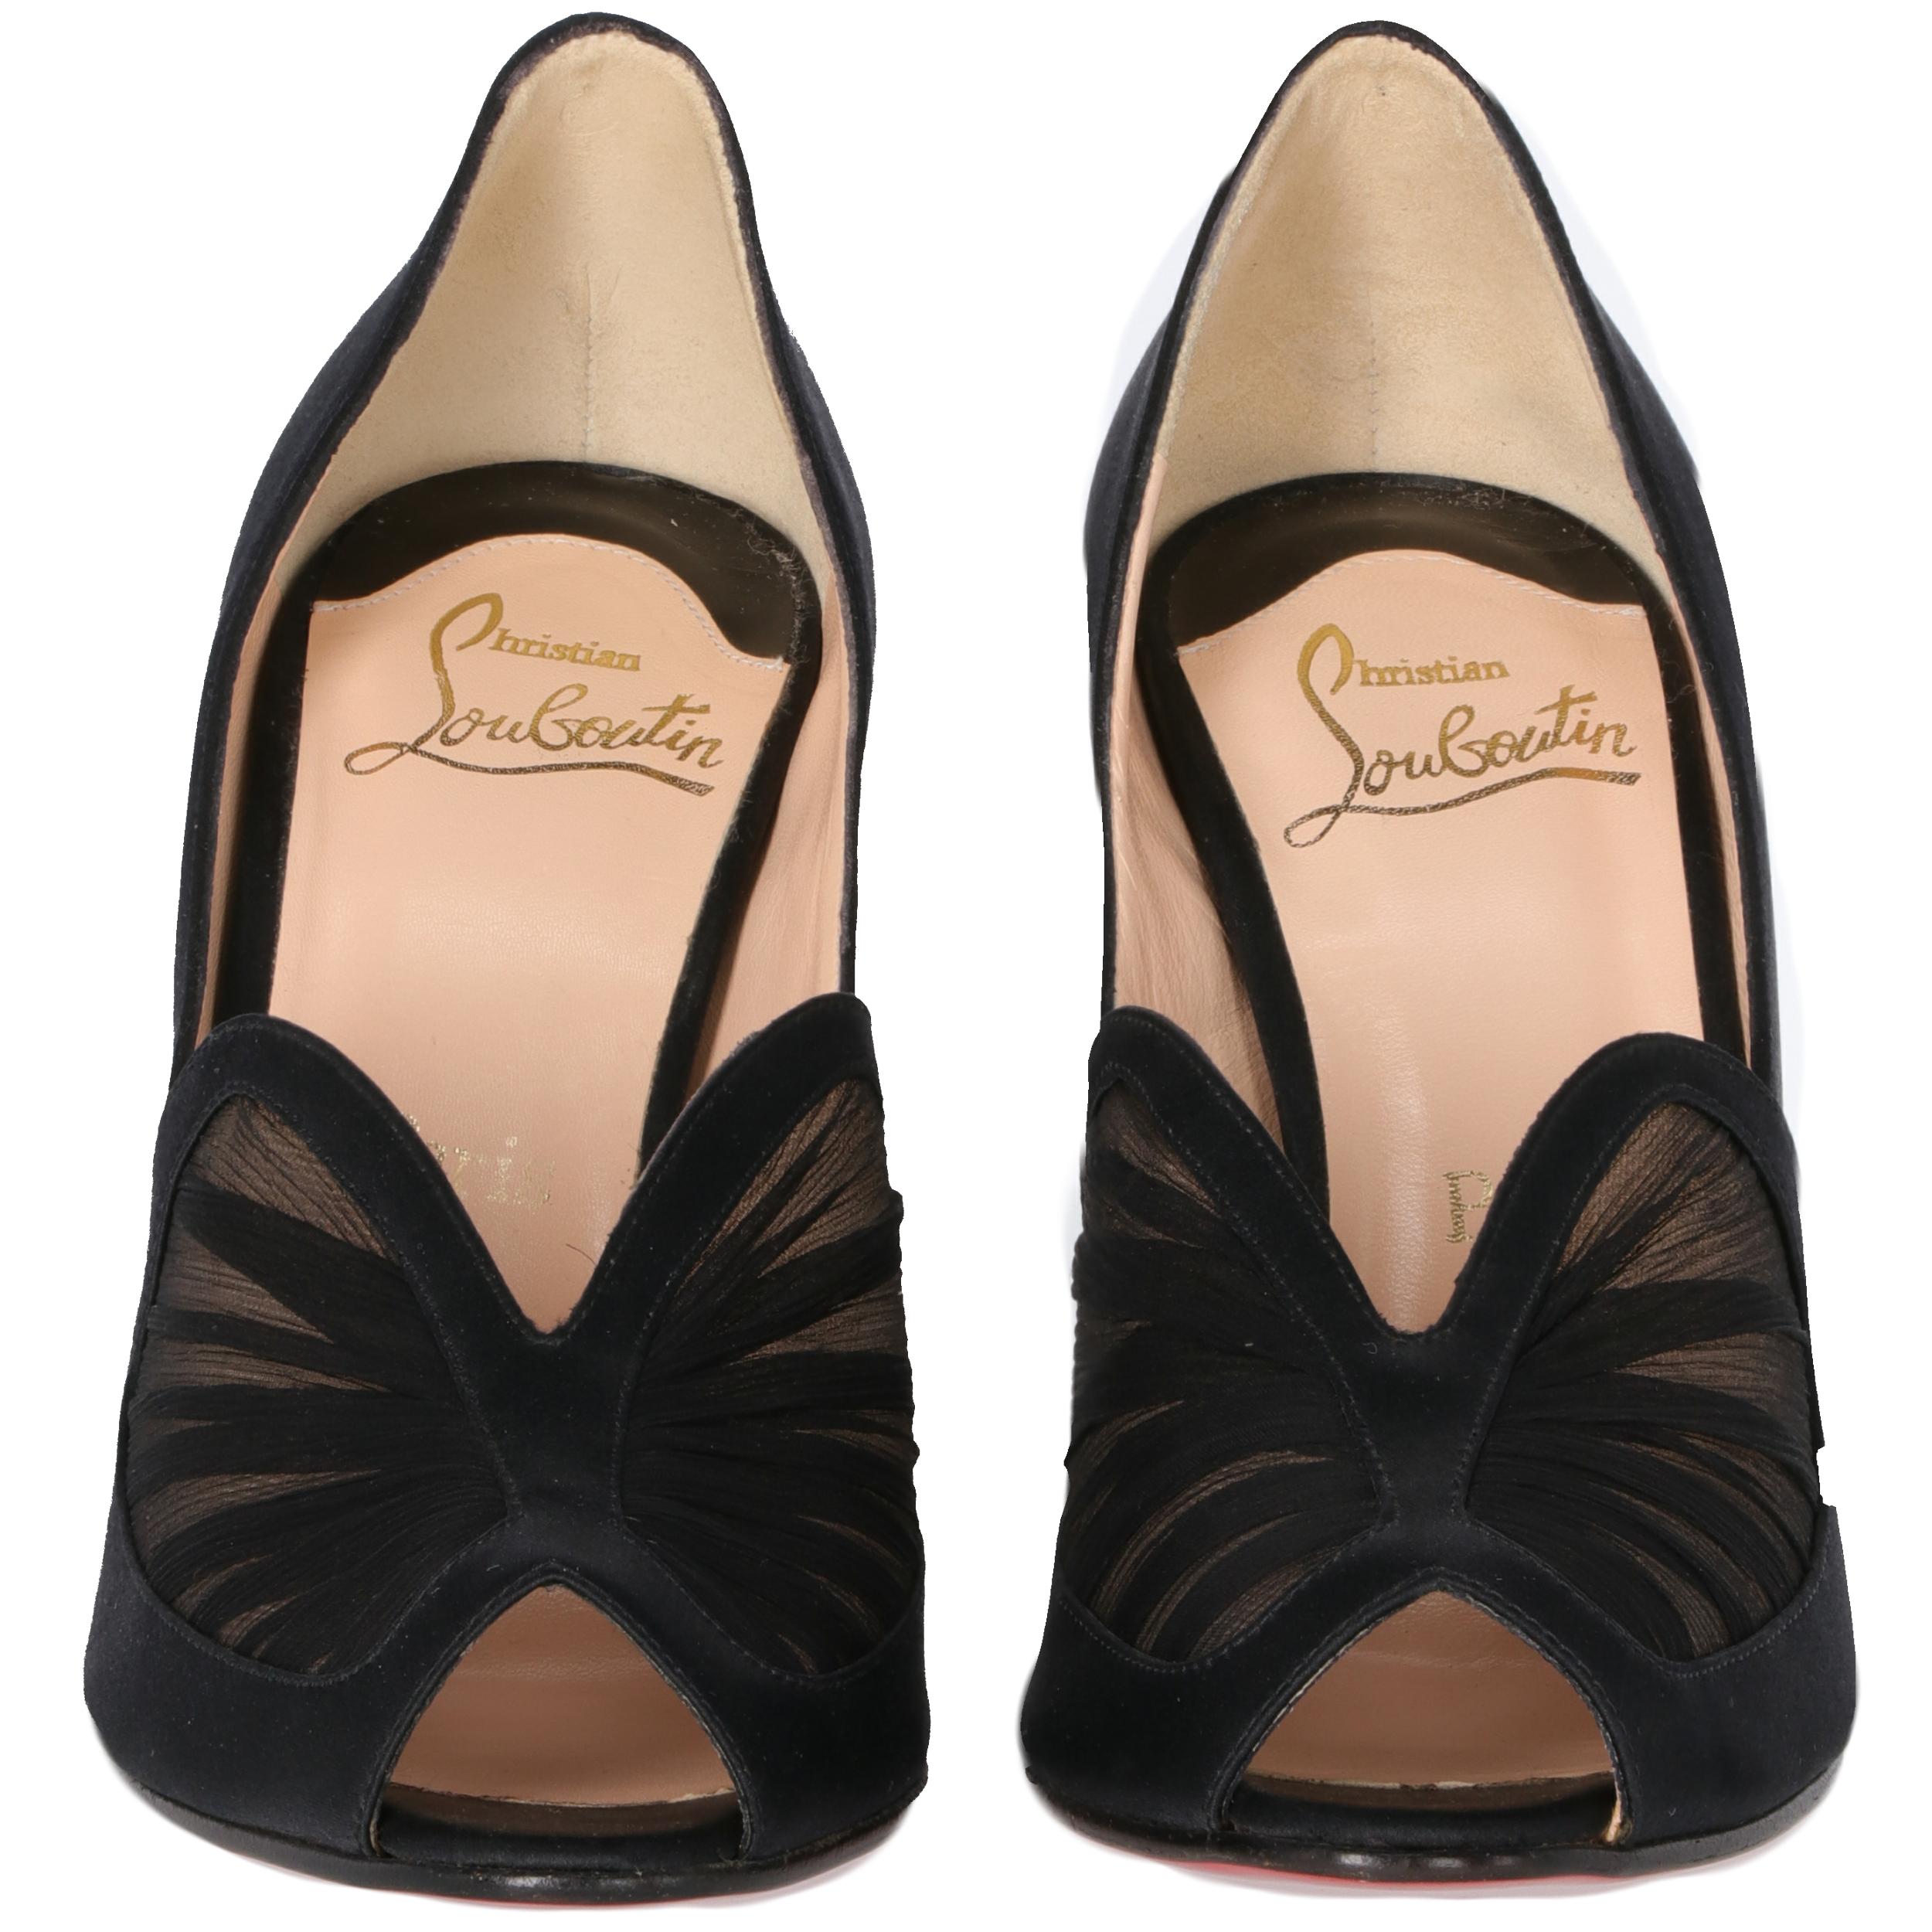 Elegant Christian Louboutin black satin 10 cm heeled shoes with open toes and black silk draped inserts on the toes. With beige leather insoles, the shoes feature the iconic red sole. 
Years: 2000s
Made in Italy

Size: 37.5 EU

Heel height: 10